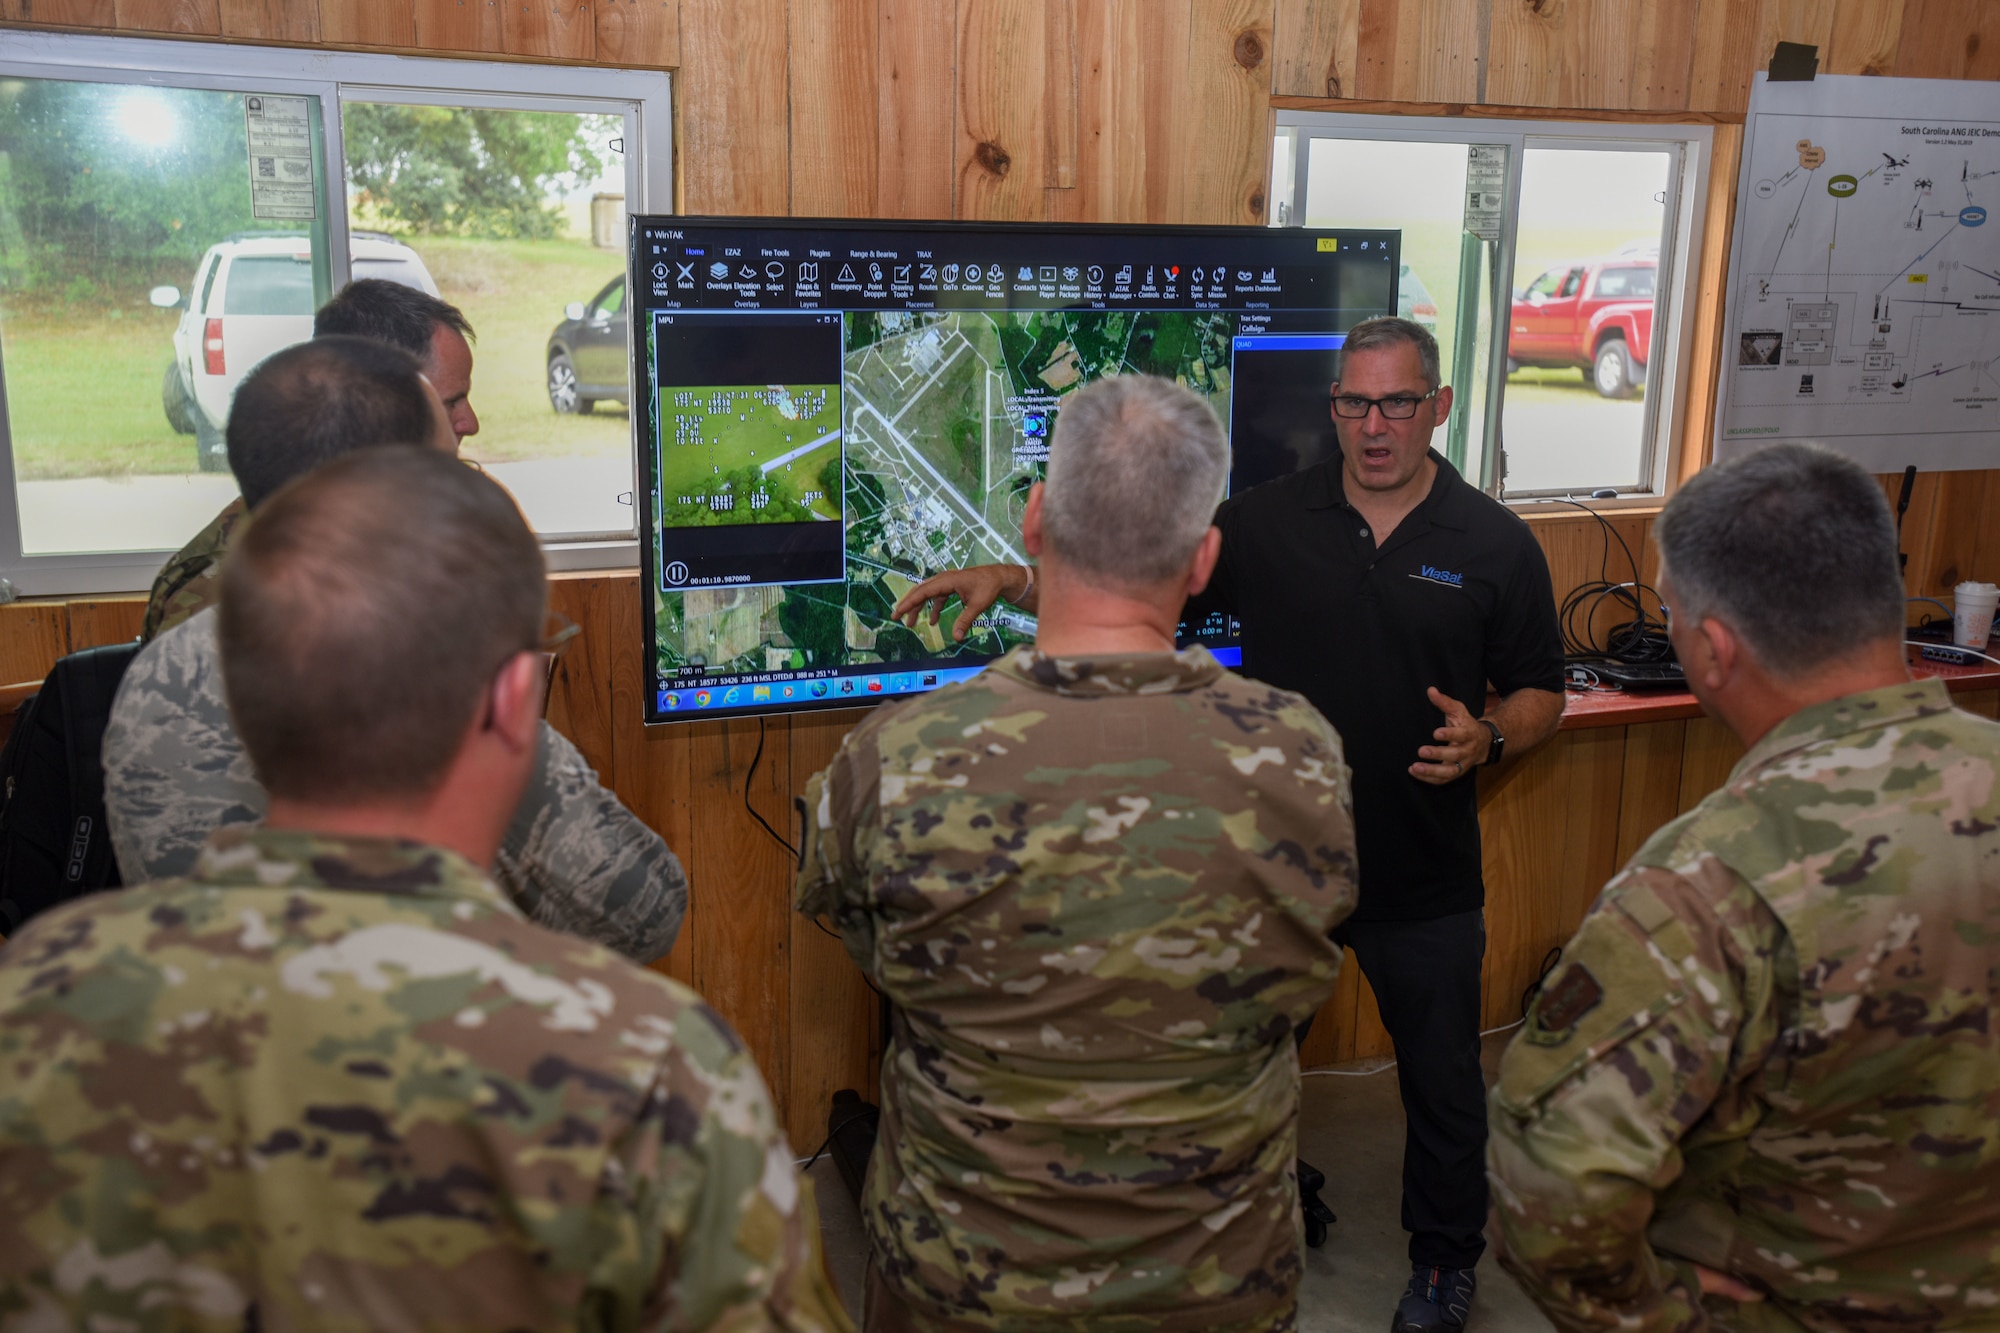 The South Carolina Air and Army National Guard hosted the National Guard Bureau for a test and demonstration of a tactical communications system